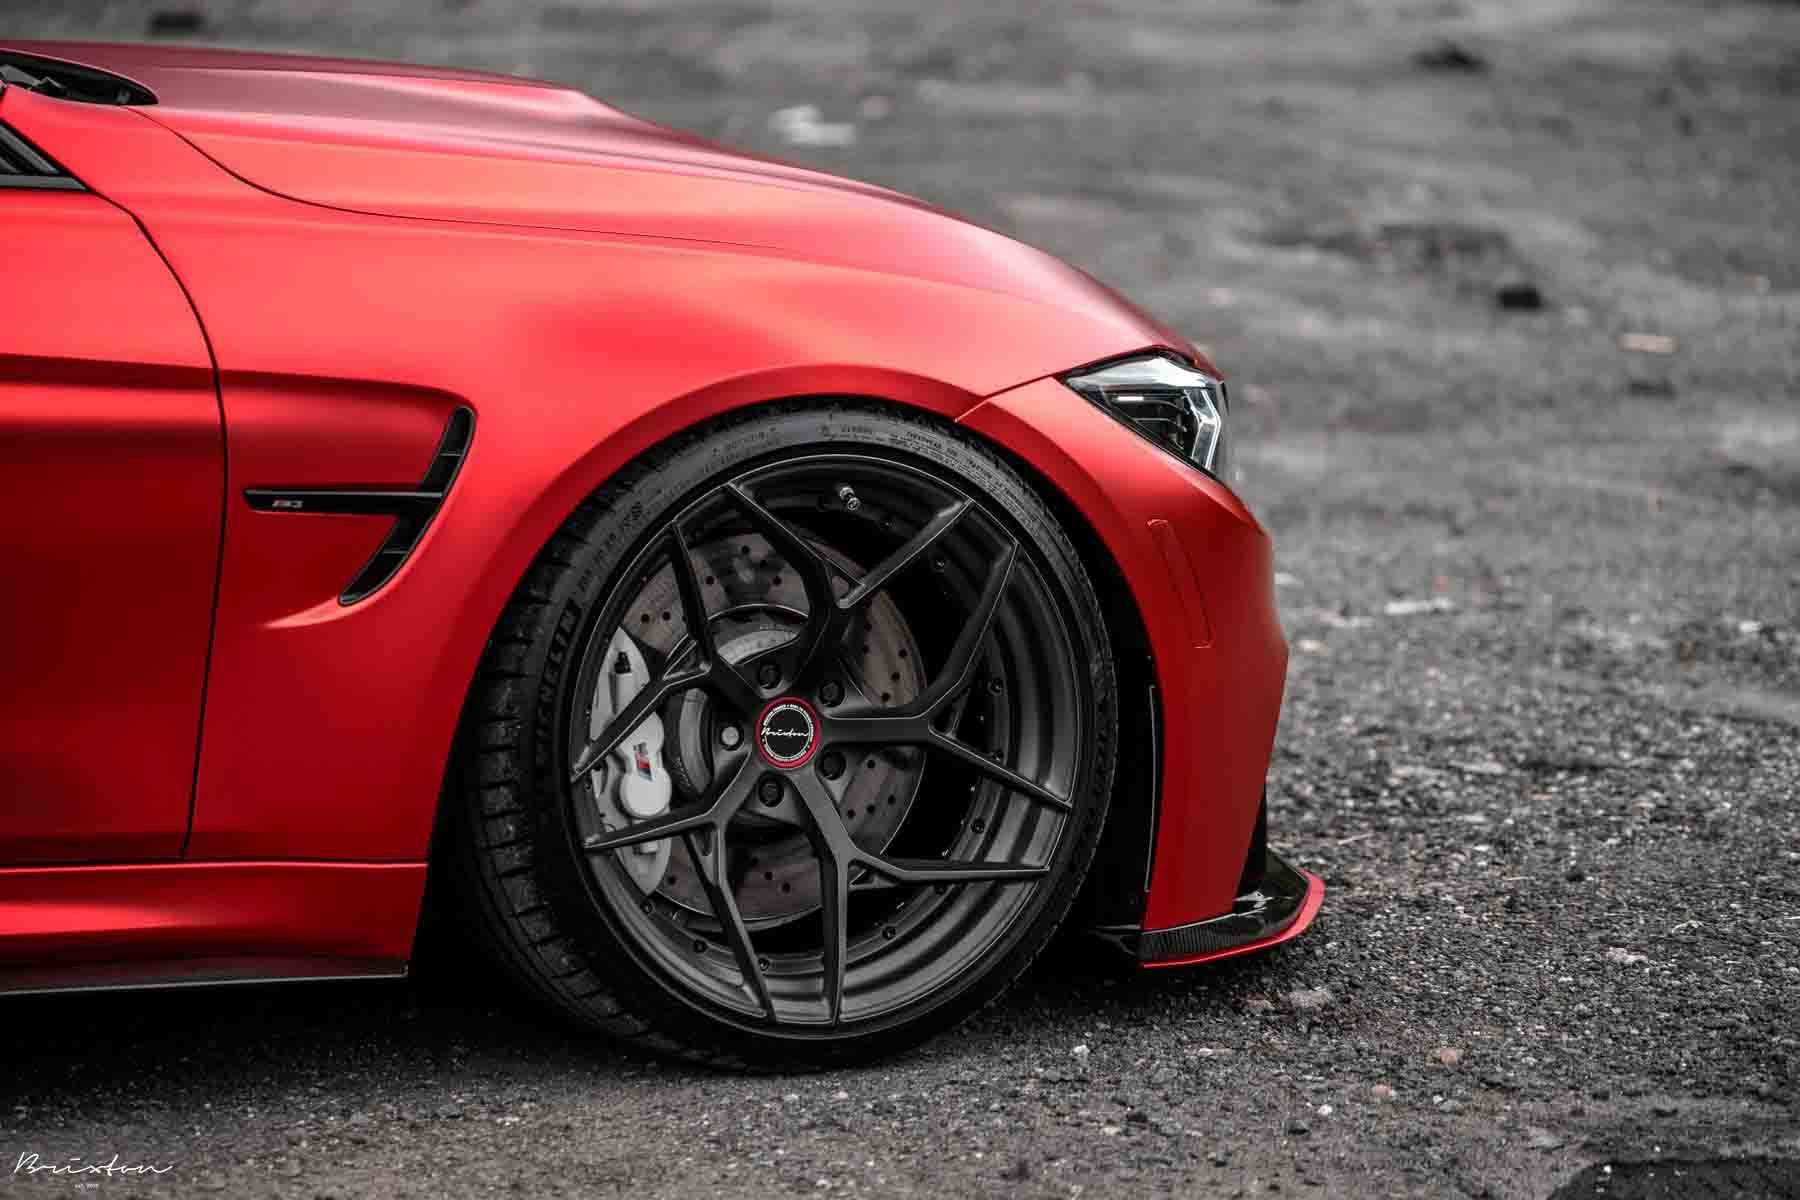 images-products-1-1768-232974056-red-bmw-f80-m3-brixton-forged-pf5-duo-series-forged-wheels-concave-20-brushed-smoke-black-7-1800.jpg